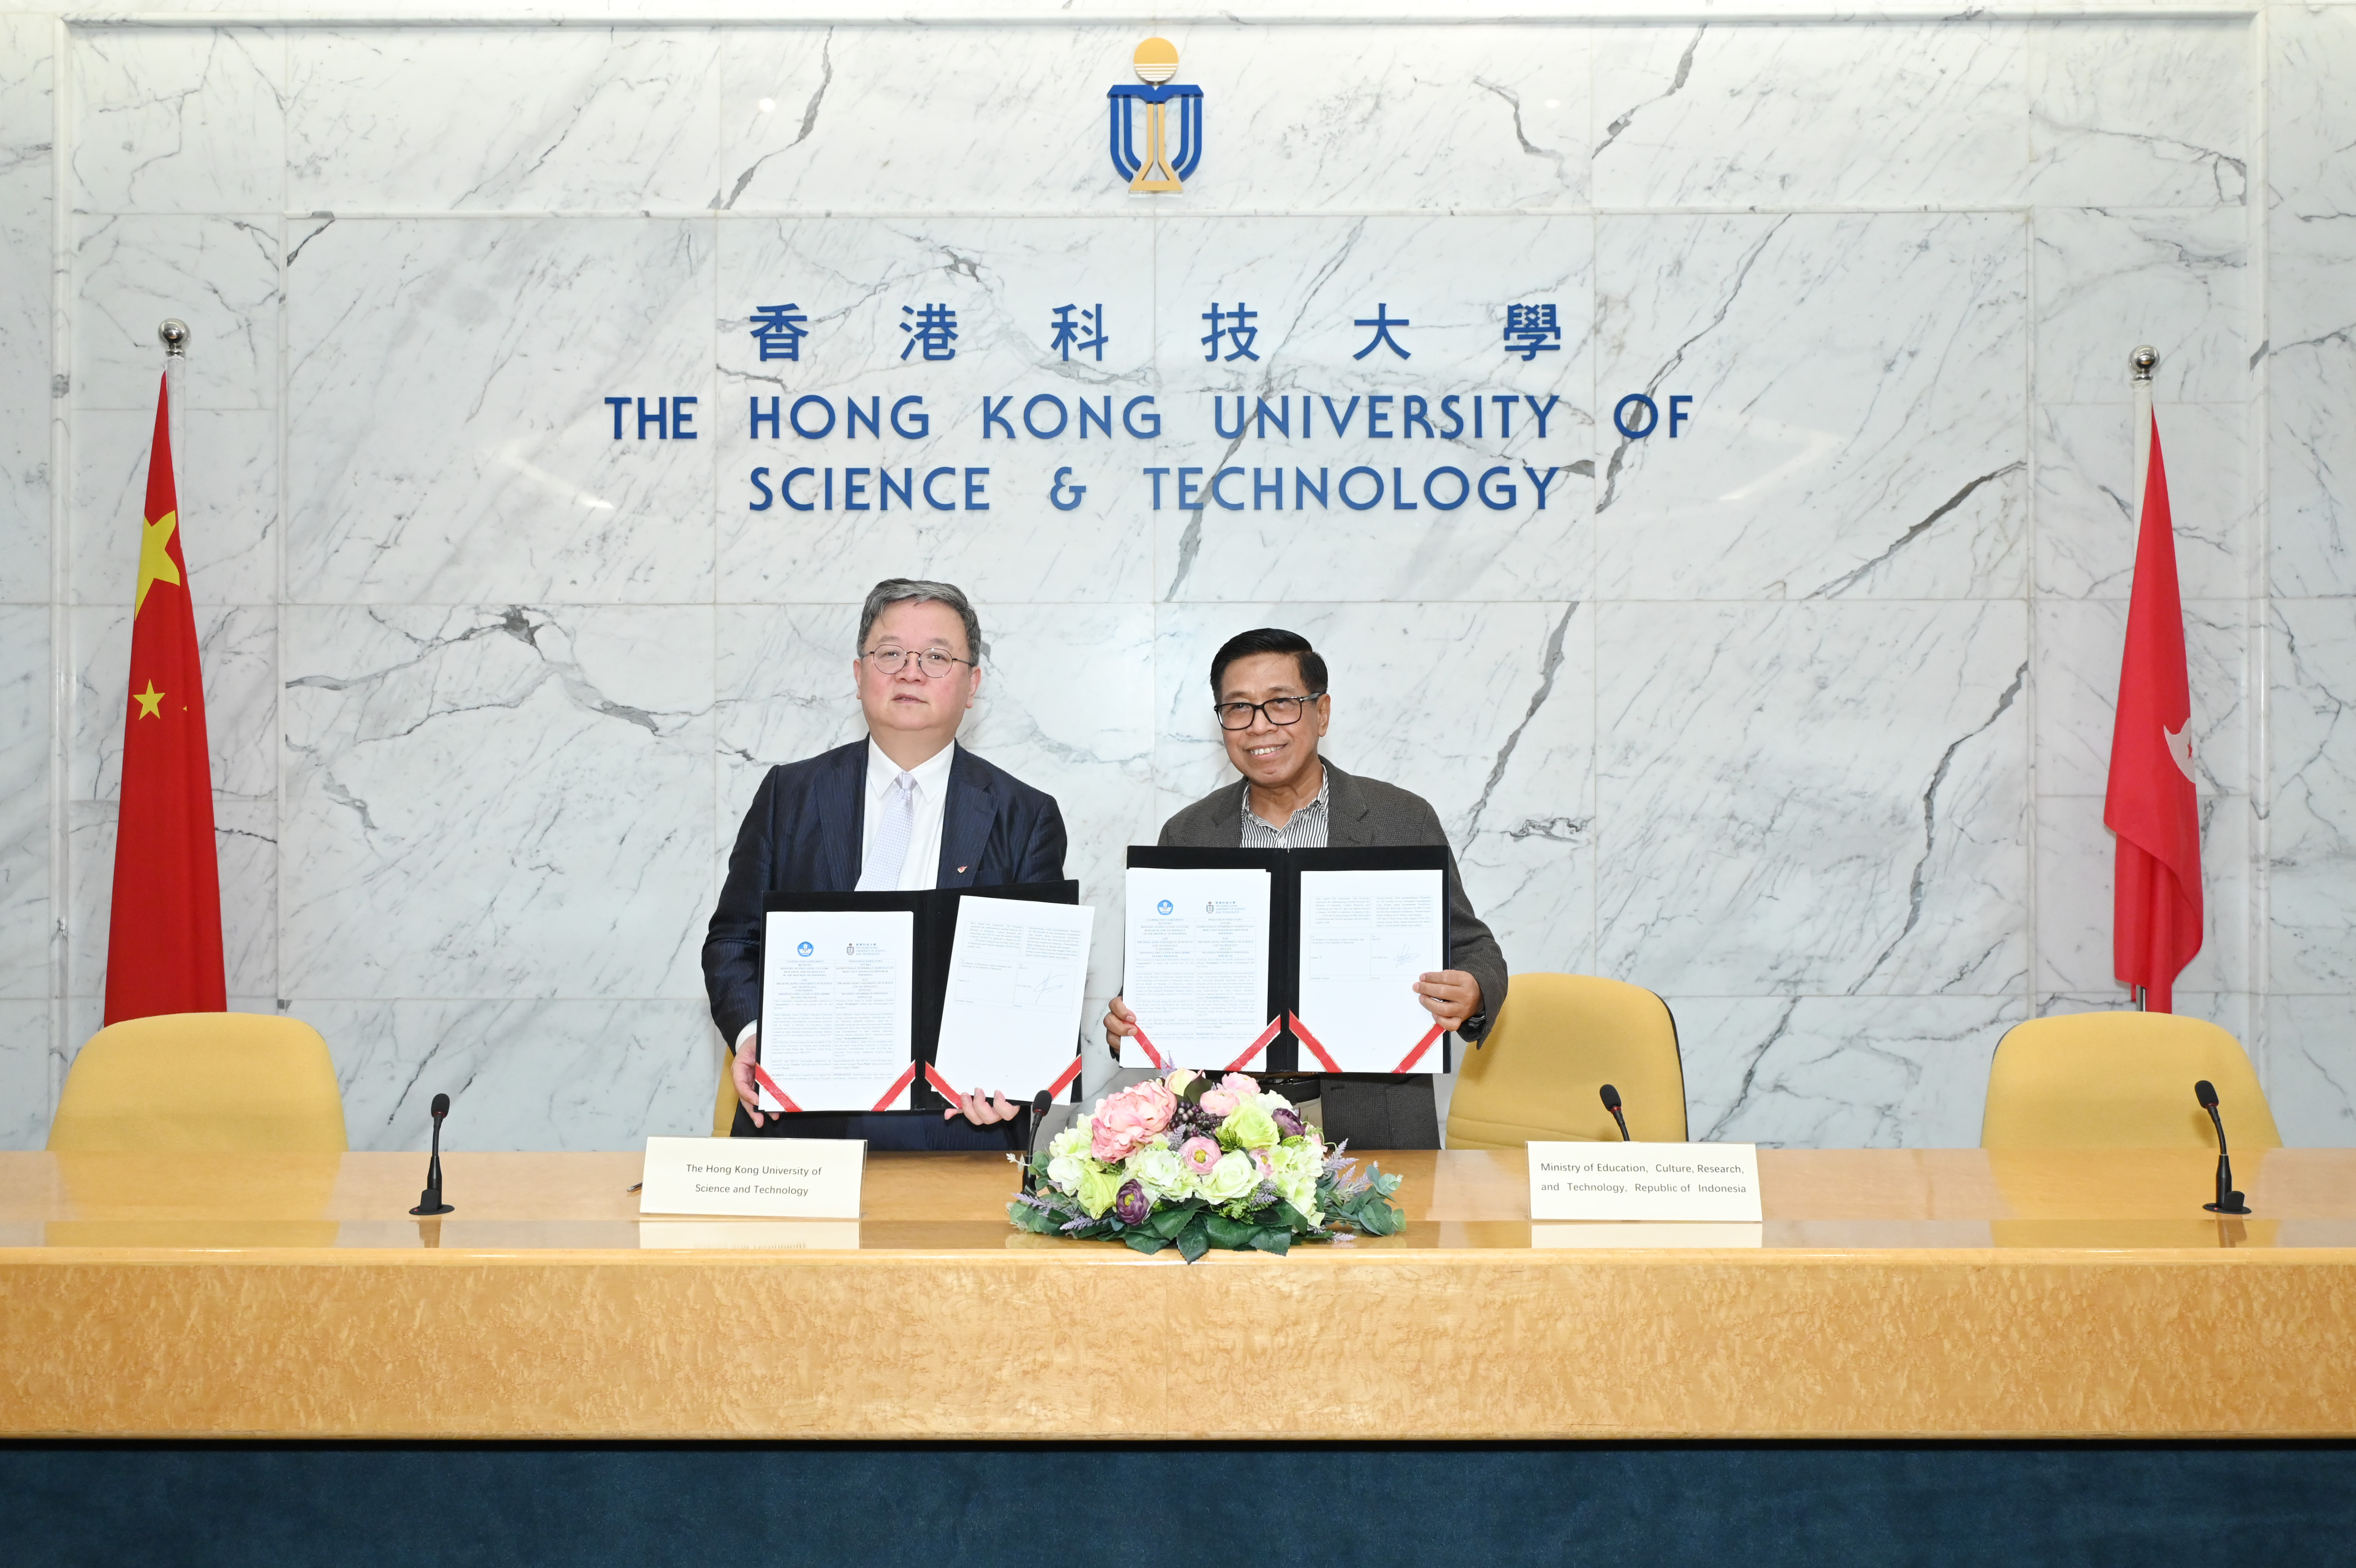 HKUST Provost Prof. GUO Yike (left) and Acting Head of the Education Financing Service Center at the Republic of Indonesia’s Ministry of Education, Culture, Research, and Technology, Mr. Abdul KAJAR (right), sign an agreement on the Indonesia Education Scholarship for Degree Program.